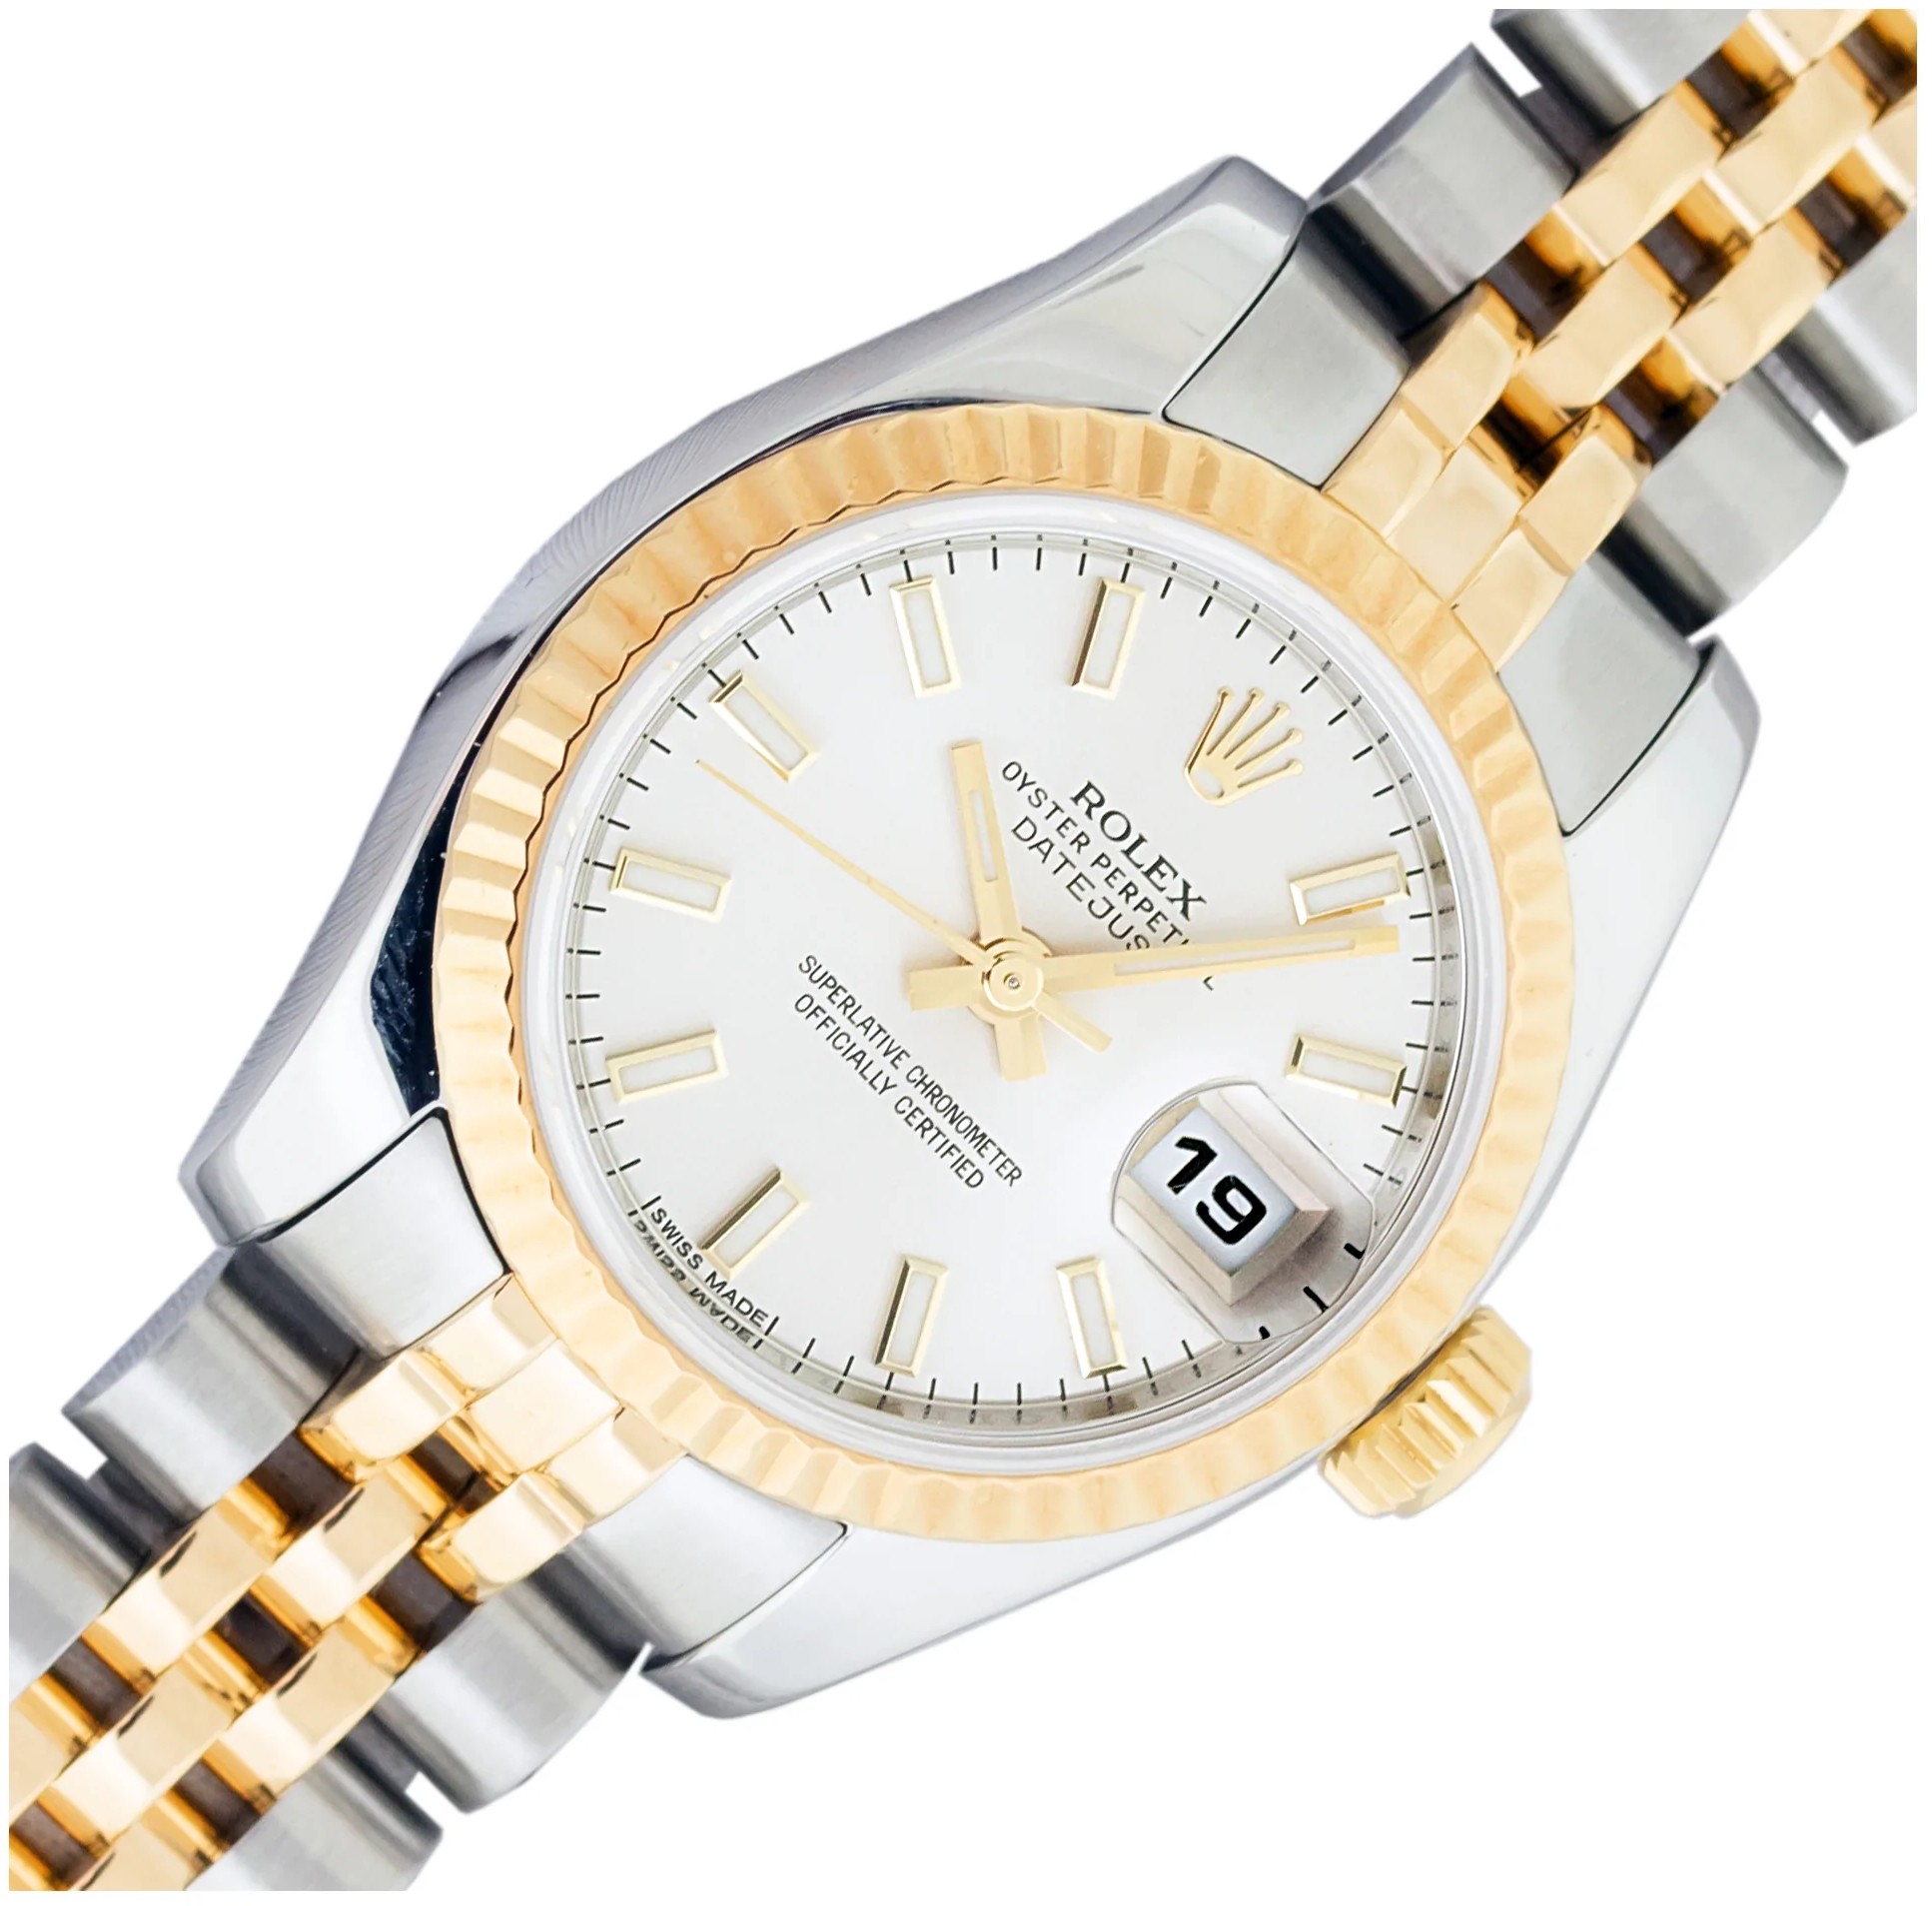 Used Rolex Ladies Watches | Preowned Women's Rolex